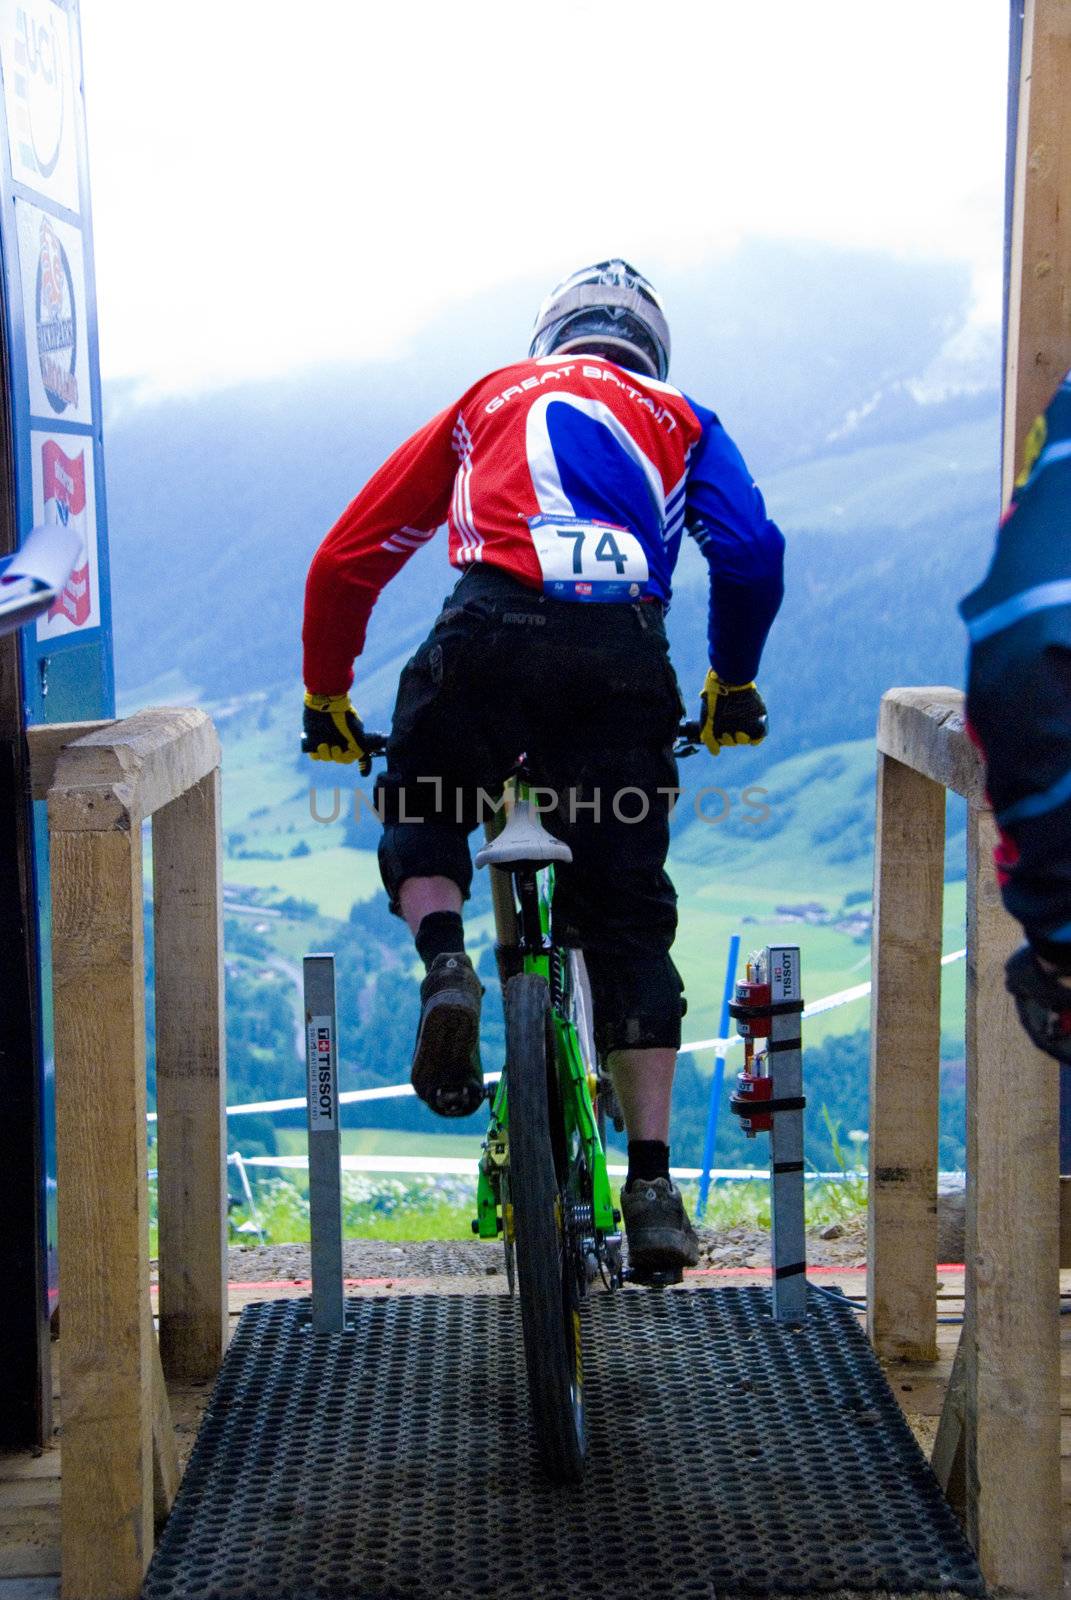 LEOGANG, AUSTRIA - JUNE 20: Participant in the UCI Mountain Bike World Cup Downhill & Four Cross June 18-20, 2010 in Leogang, Austria.